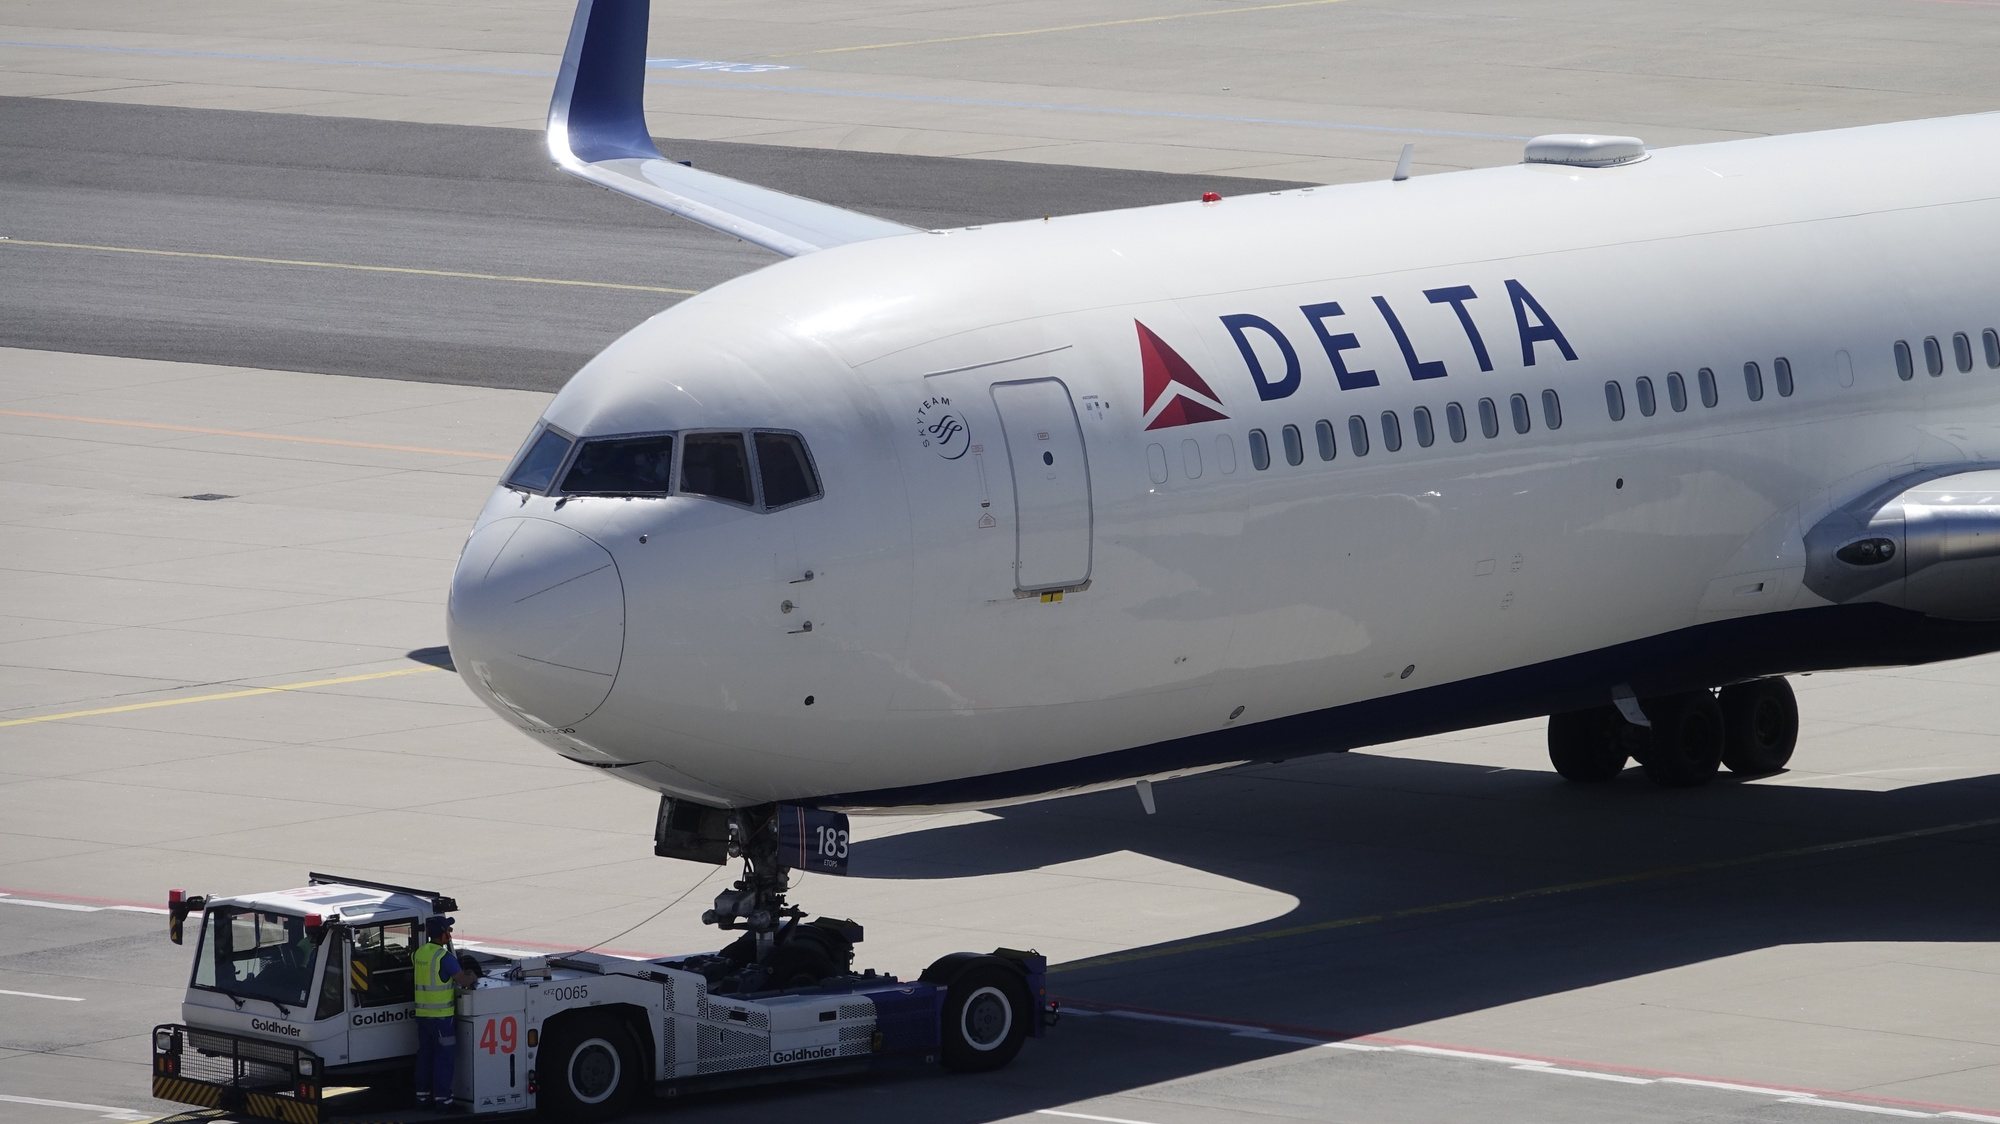 epa08937237 (FILE) - A Boeing 767-332 of Delta Air Lines is moved from the parking position prior to take-off at the Frankfurt airport, Germany, 08 May 2018 (reissued 14 January 2021). Delta Airlines on 14 January 2021 released their 2020 results saying their December quarter 2020 GAAP pre-tax loss stood at 1.1 billion USD and loss per share of 1.19 USD on total revenue of 4.0 billion USD, while December quarter 2020 adjusted pre-tax loss of 2.1 billion USD and adjusted loss per share of 2.53 USD on adjusted operating revenue of 3.5 billion USD. Full year 2020 GAAP pre-tax loss stood at 15.6 billion USD and loss per share of 19.49 USD on total revenue of 17.1 billion USD. Full year 2020 adjusted pre-tax loss was 9.0 billion and adjusted loss per share of 10.76 USD on adjusted operating revenue of 15.9 billion USD.  EPA/MAURITZ ANTIN *** Local Caption *** 54316176